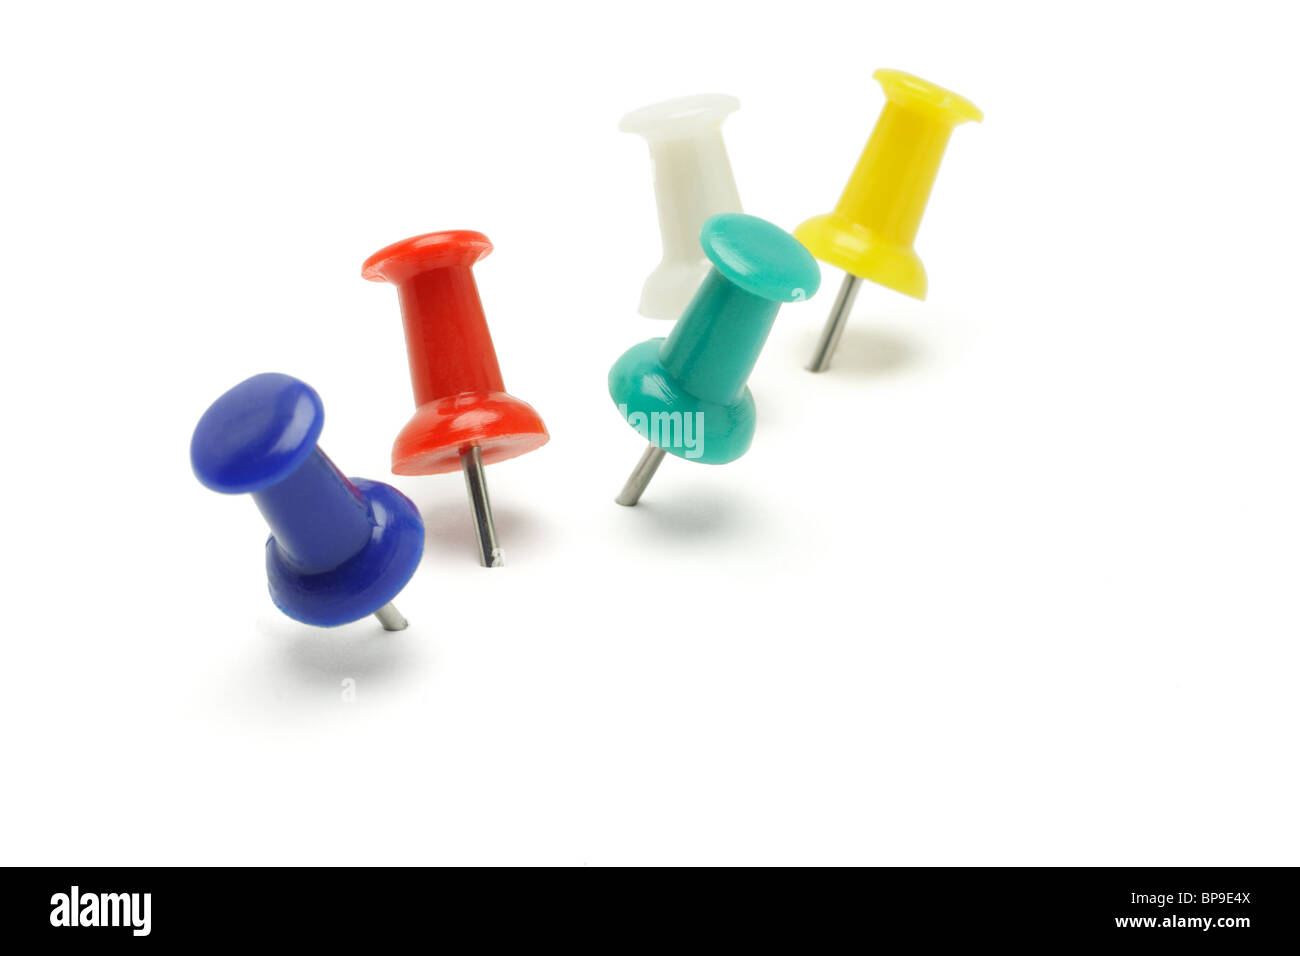 Colorful push pins arranged on white background Stock Photo